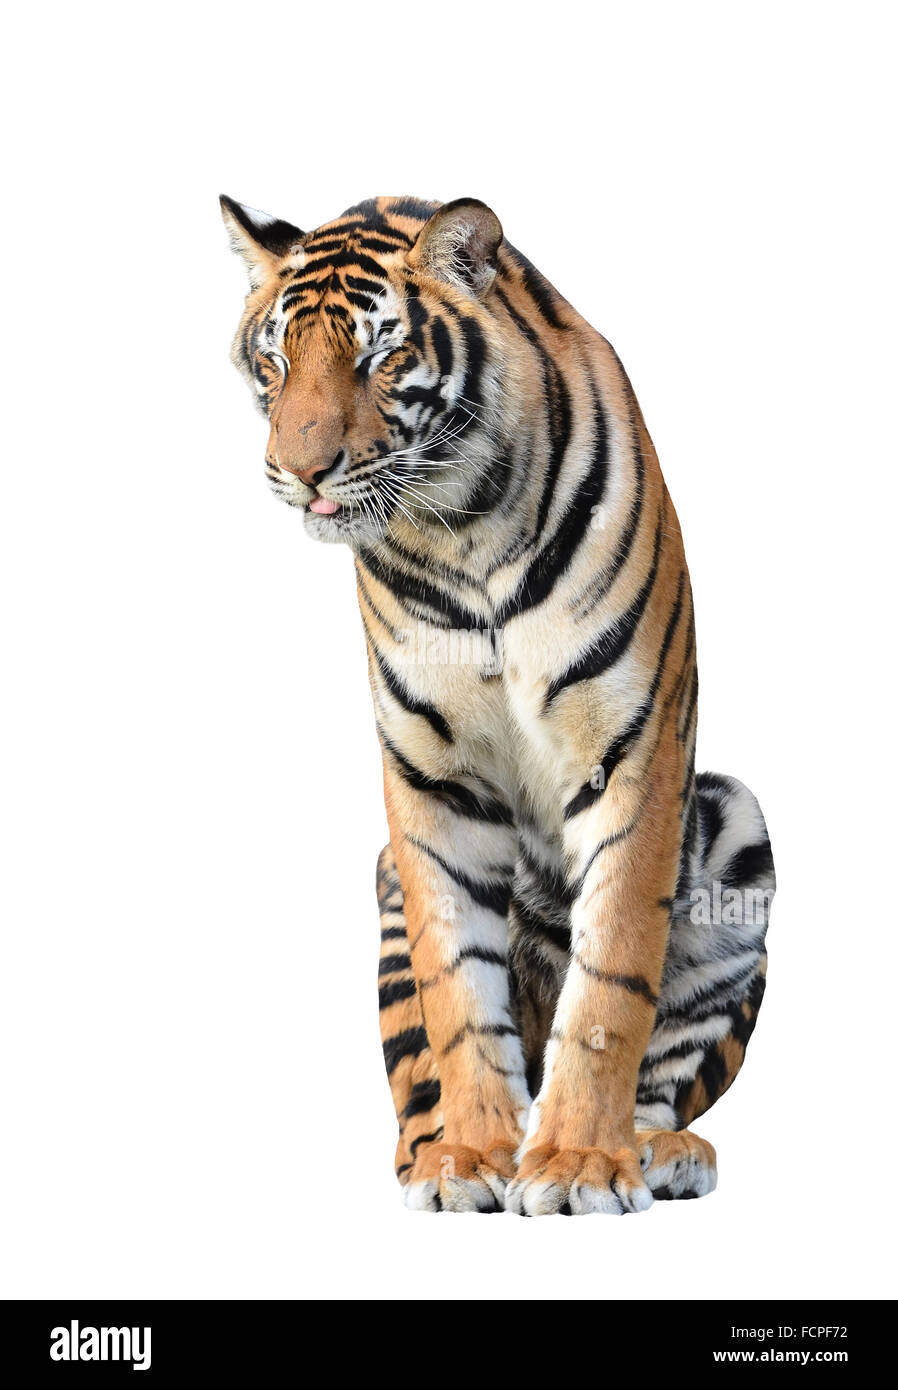 bengal tiger isolated on white background Stock Photo